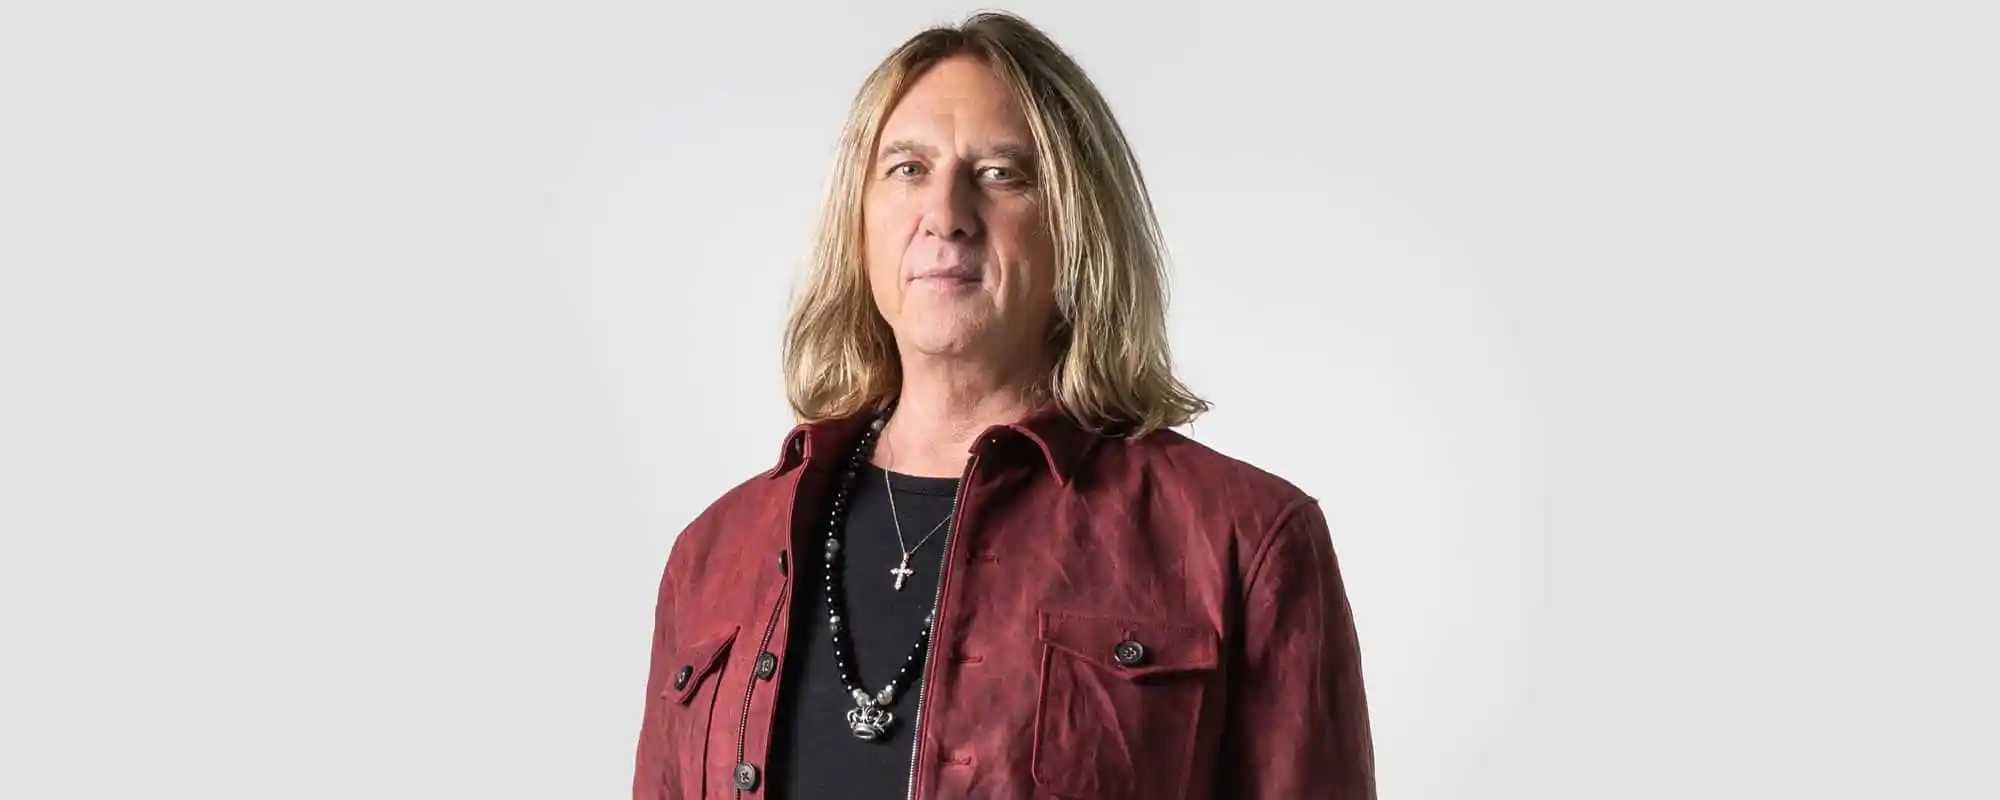 Def Leppard’s Joe Elliott Shares Personal Collection in ‘The Def Leppard Vault’